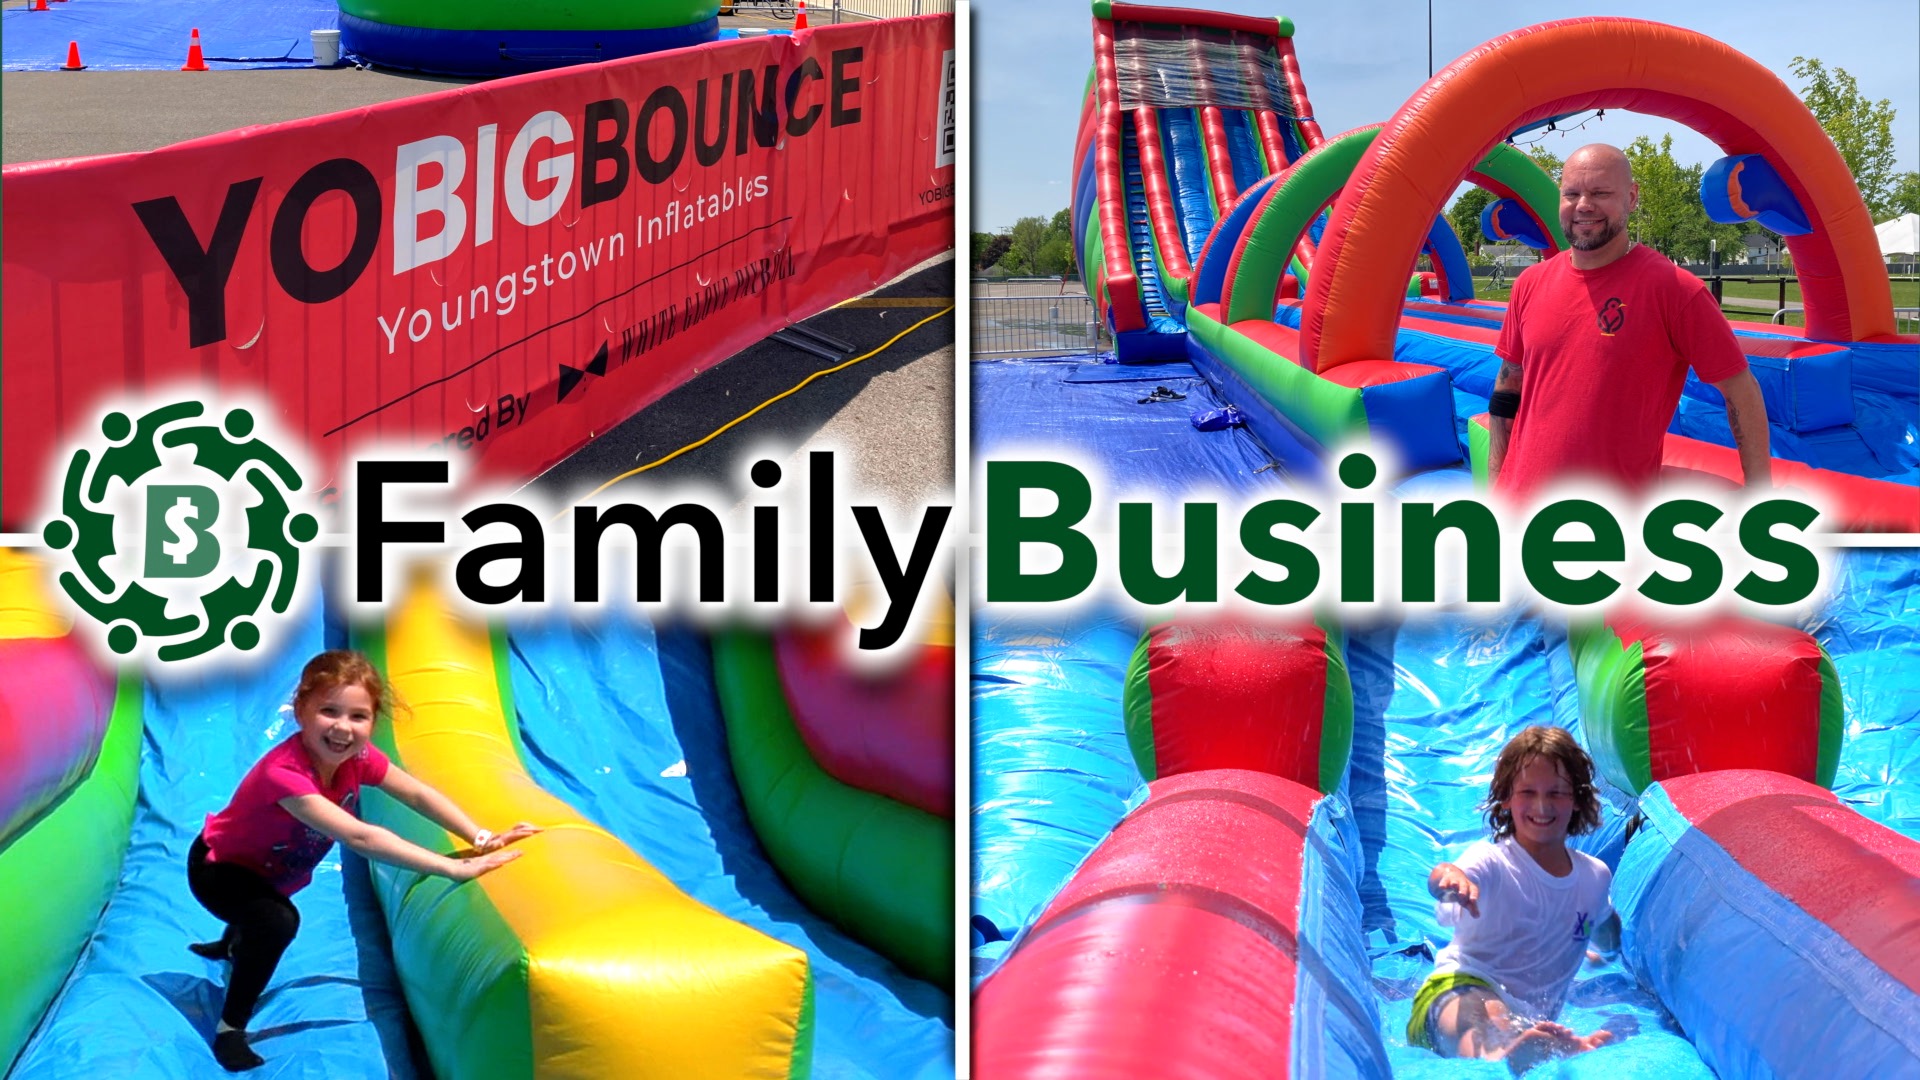 Yo Big Bounce Aims for Expansion